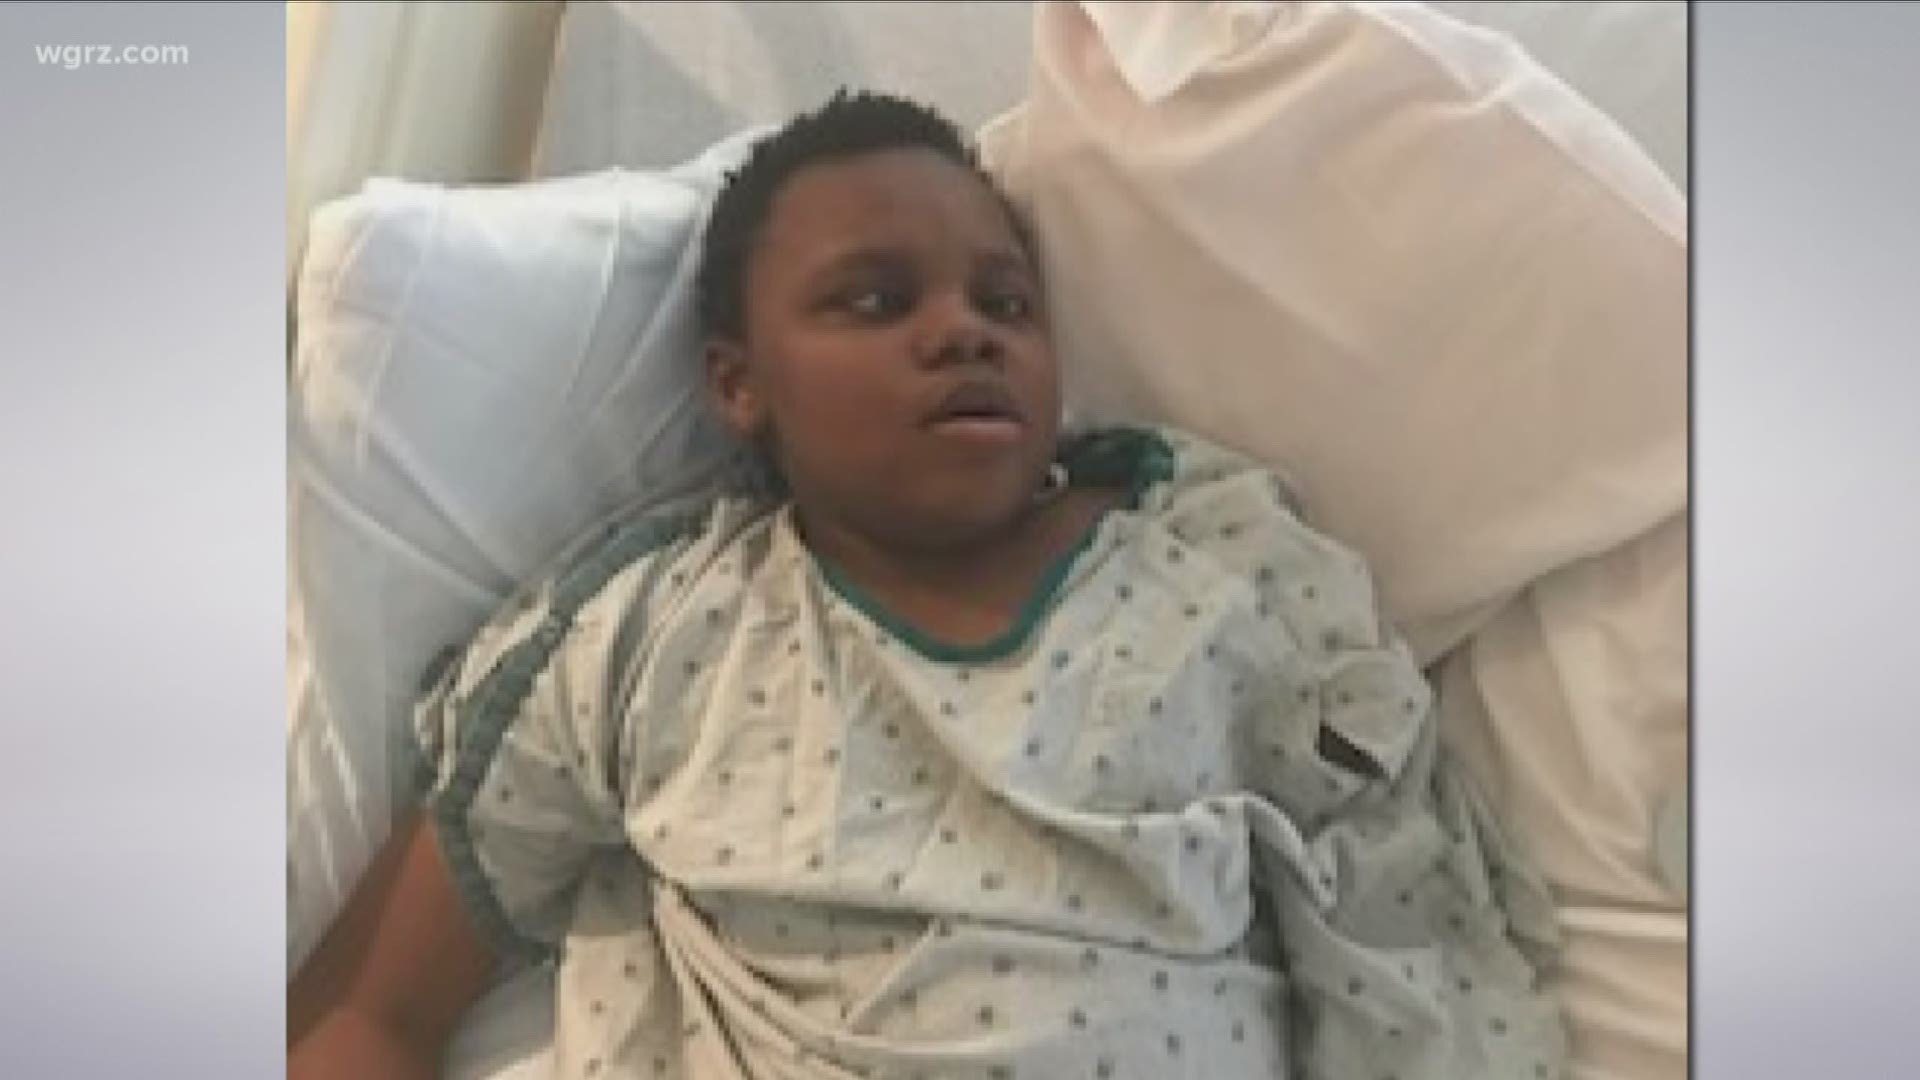 DaJuan "Soliel" Brown turned 11 on May 24 and it was a happy time, but five days later he was diagnosed with a rare form of brain cancer. It's called D-I-P-G diffuse intrinsic pontine glioma.